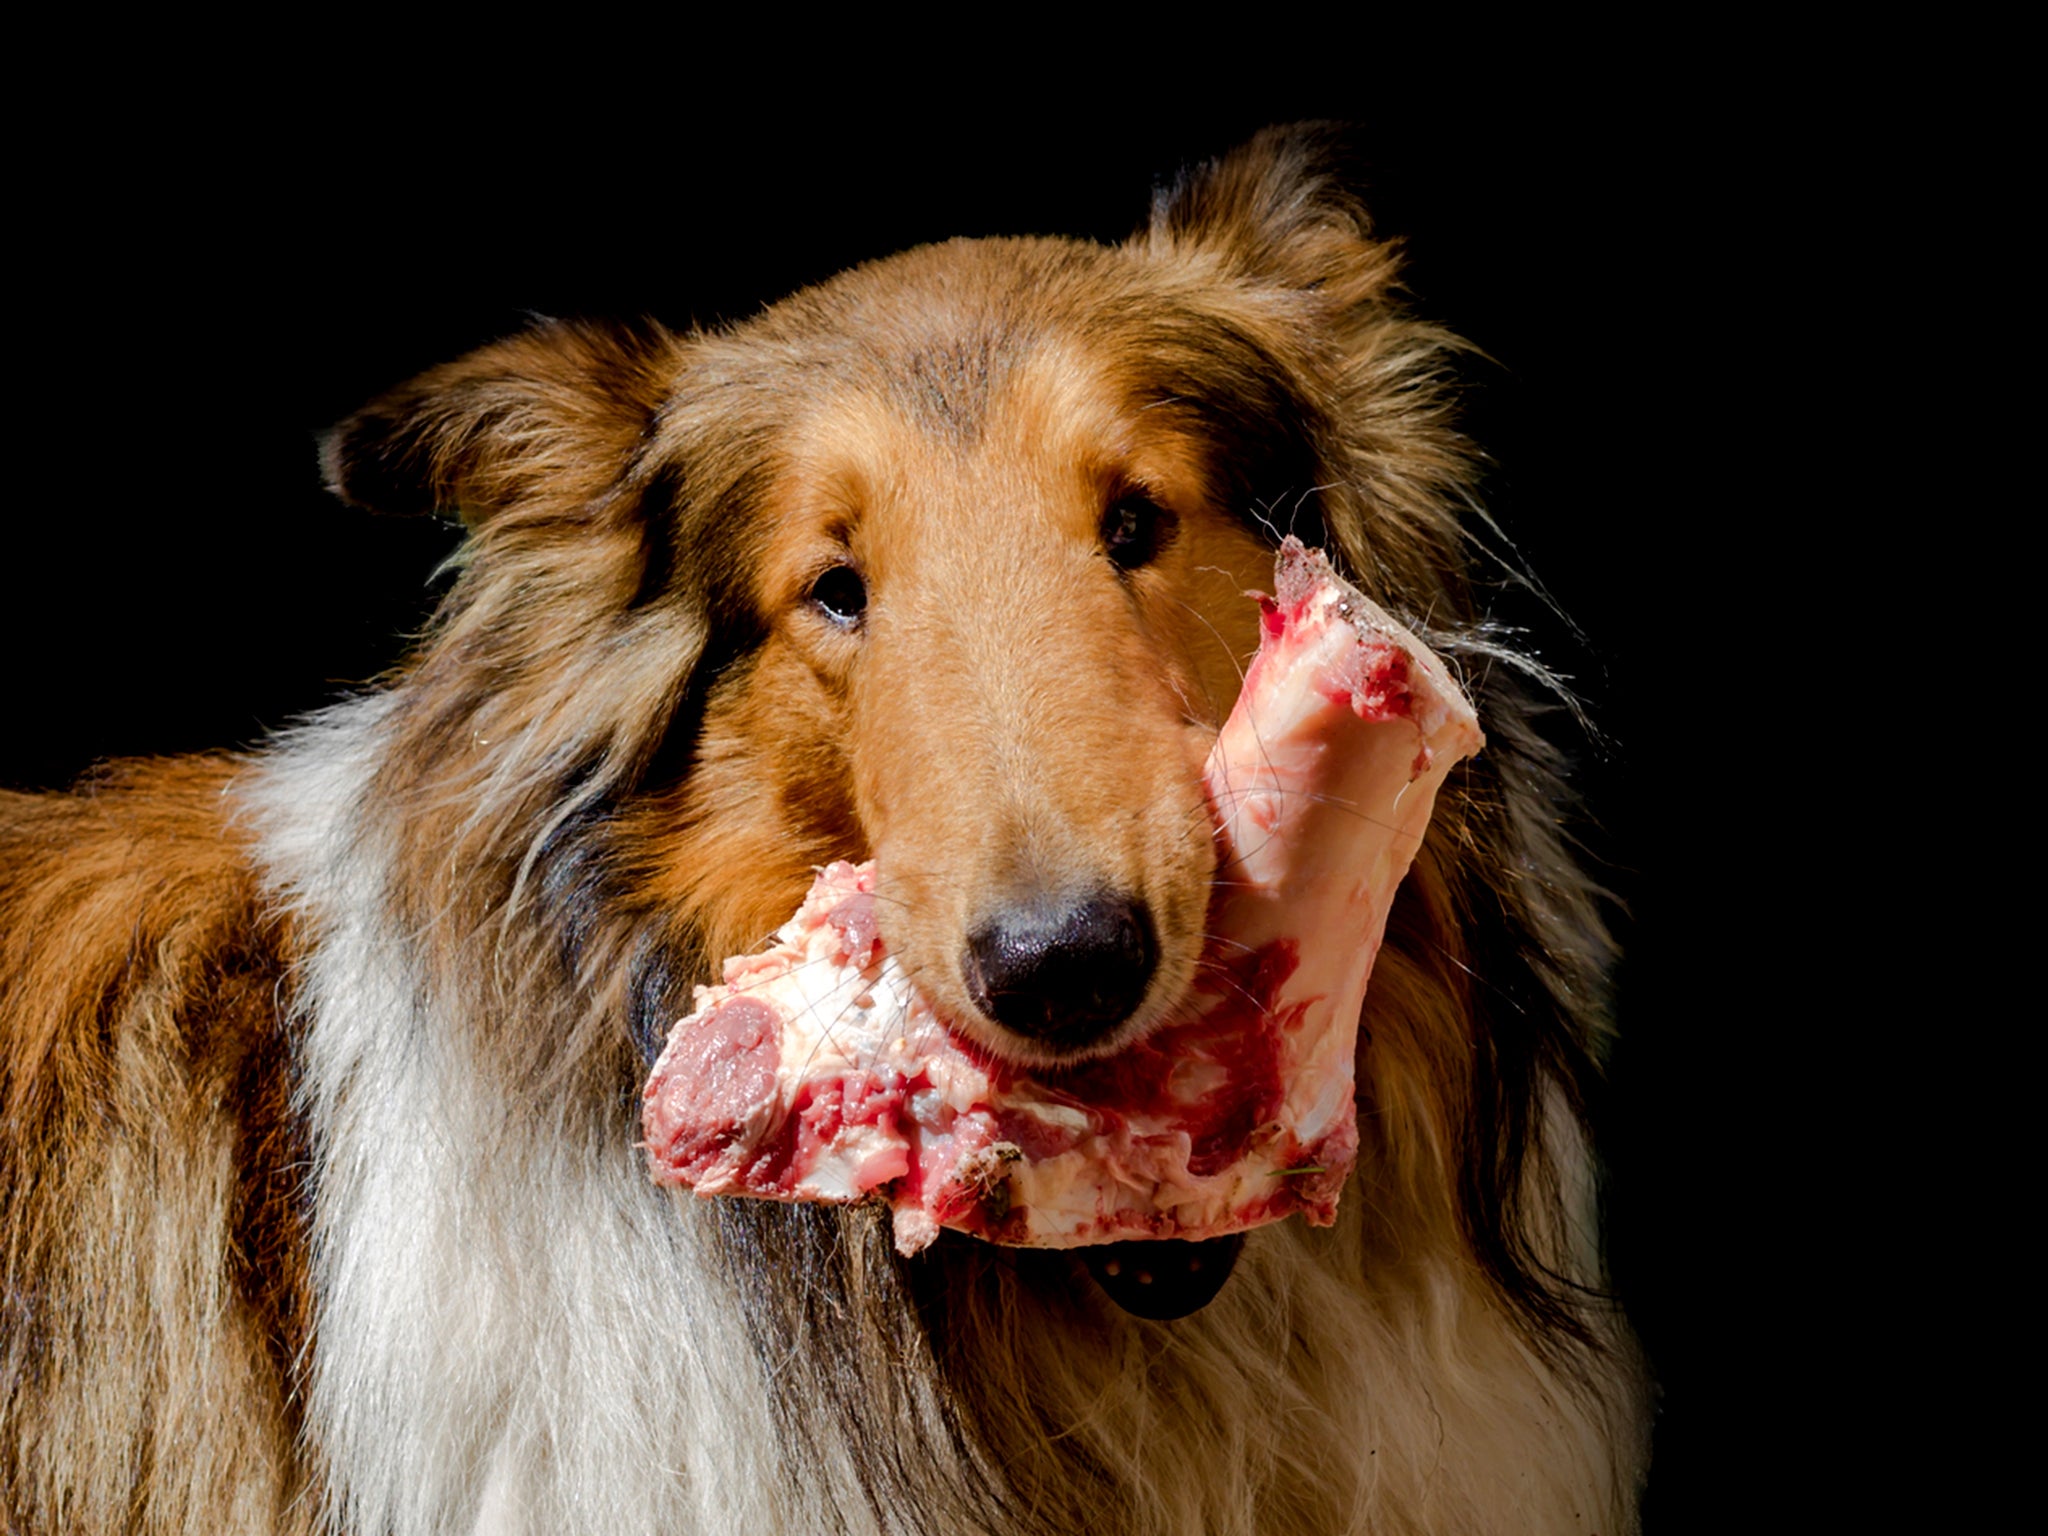 Raw meat for your dog could be bad for your health